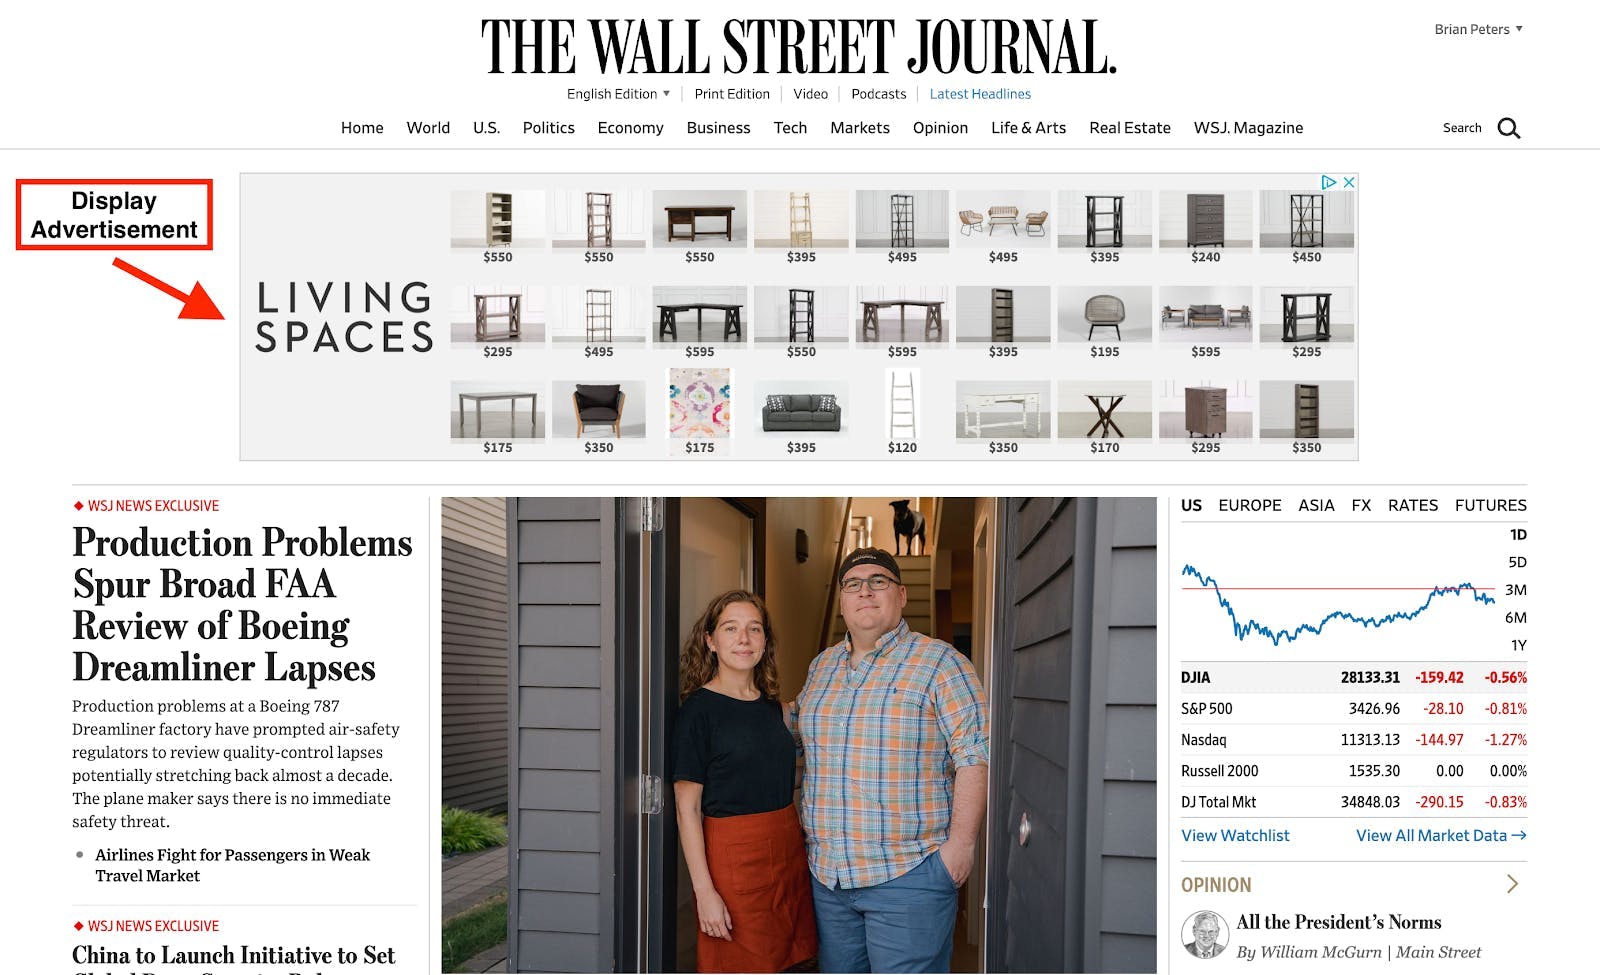 An example of a display ad on The Wall Street Journal's homepage